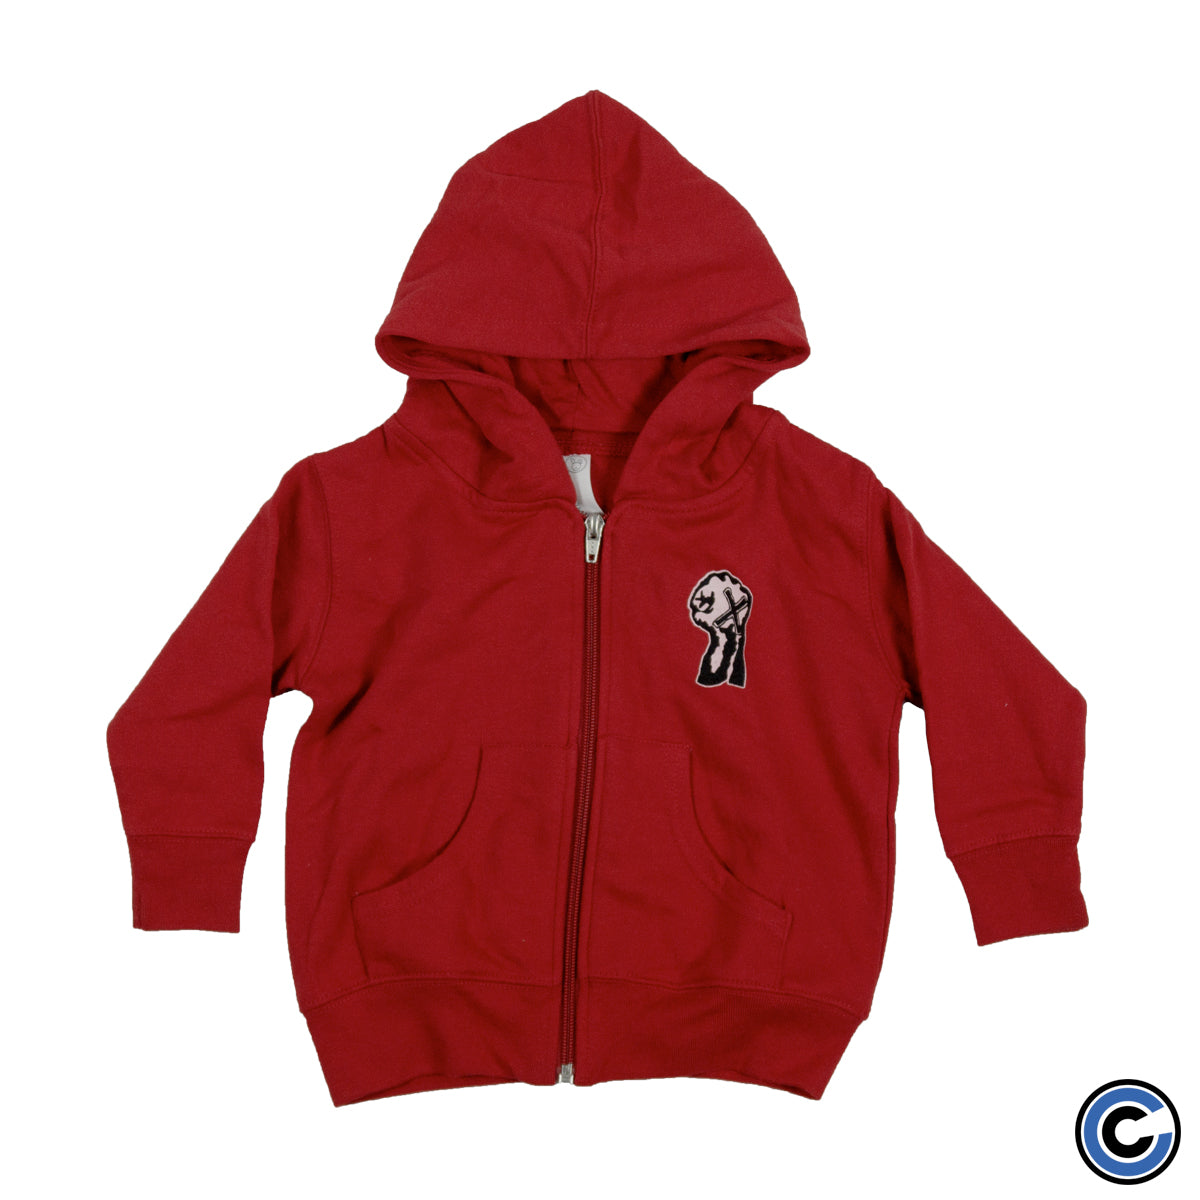 Youth of Today "Fist" Toddler Zip Hoodie